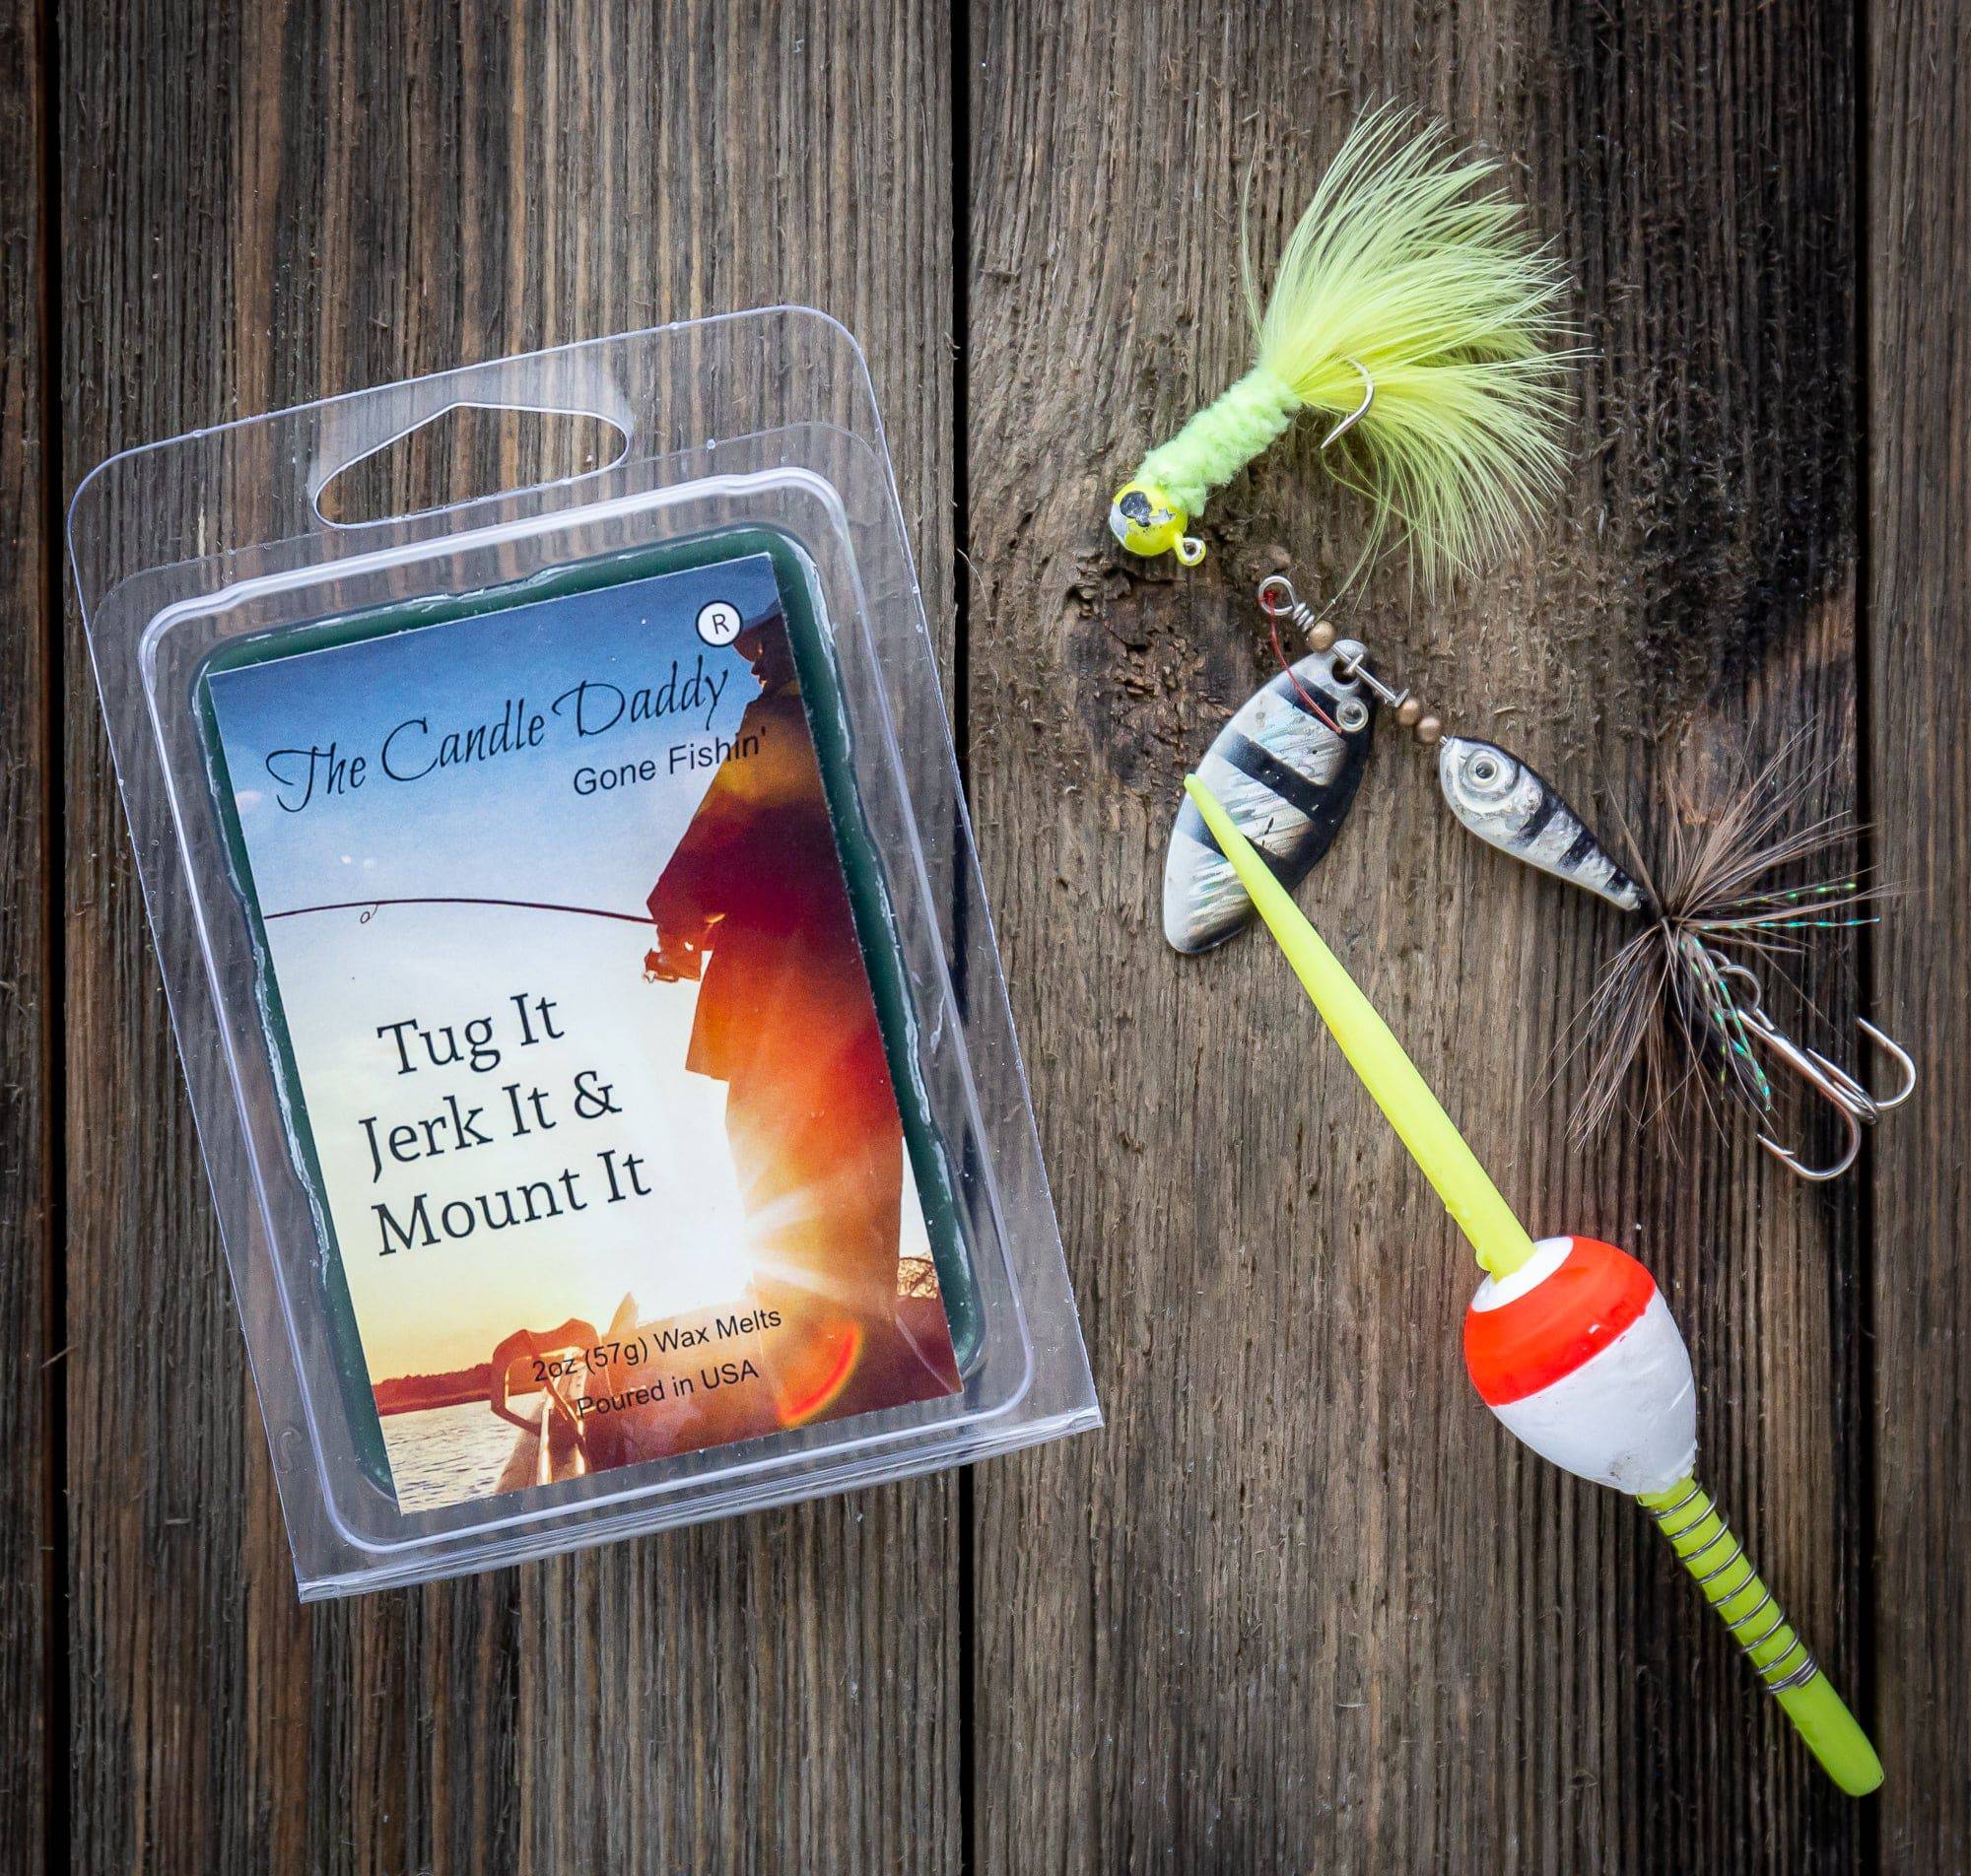 5 Pack - The Candle Daddy's Gone Fishin' - Tug It Jerk It & Mount It -  Rustic Cabin Scented Melt- Maximum Scent Wax Cubes/Melts - 2 Ounces x 5  Packs = 10 Ounces